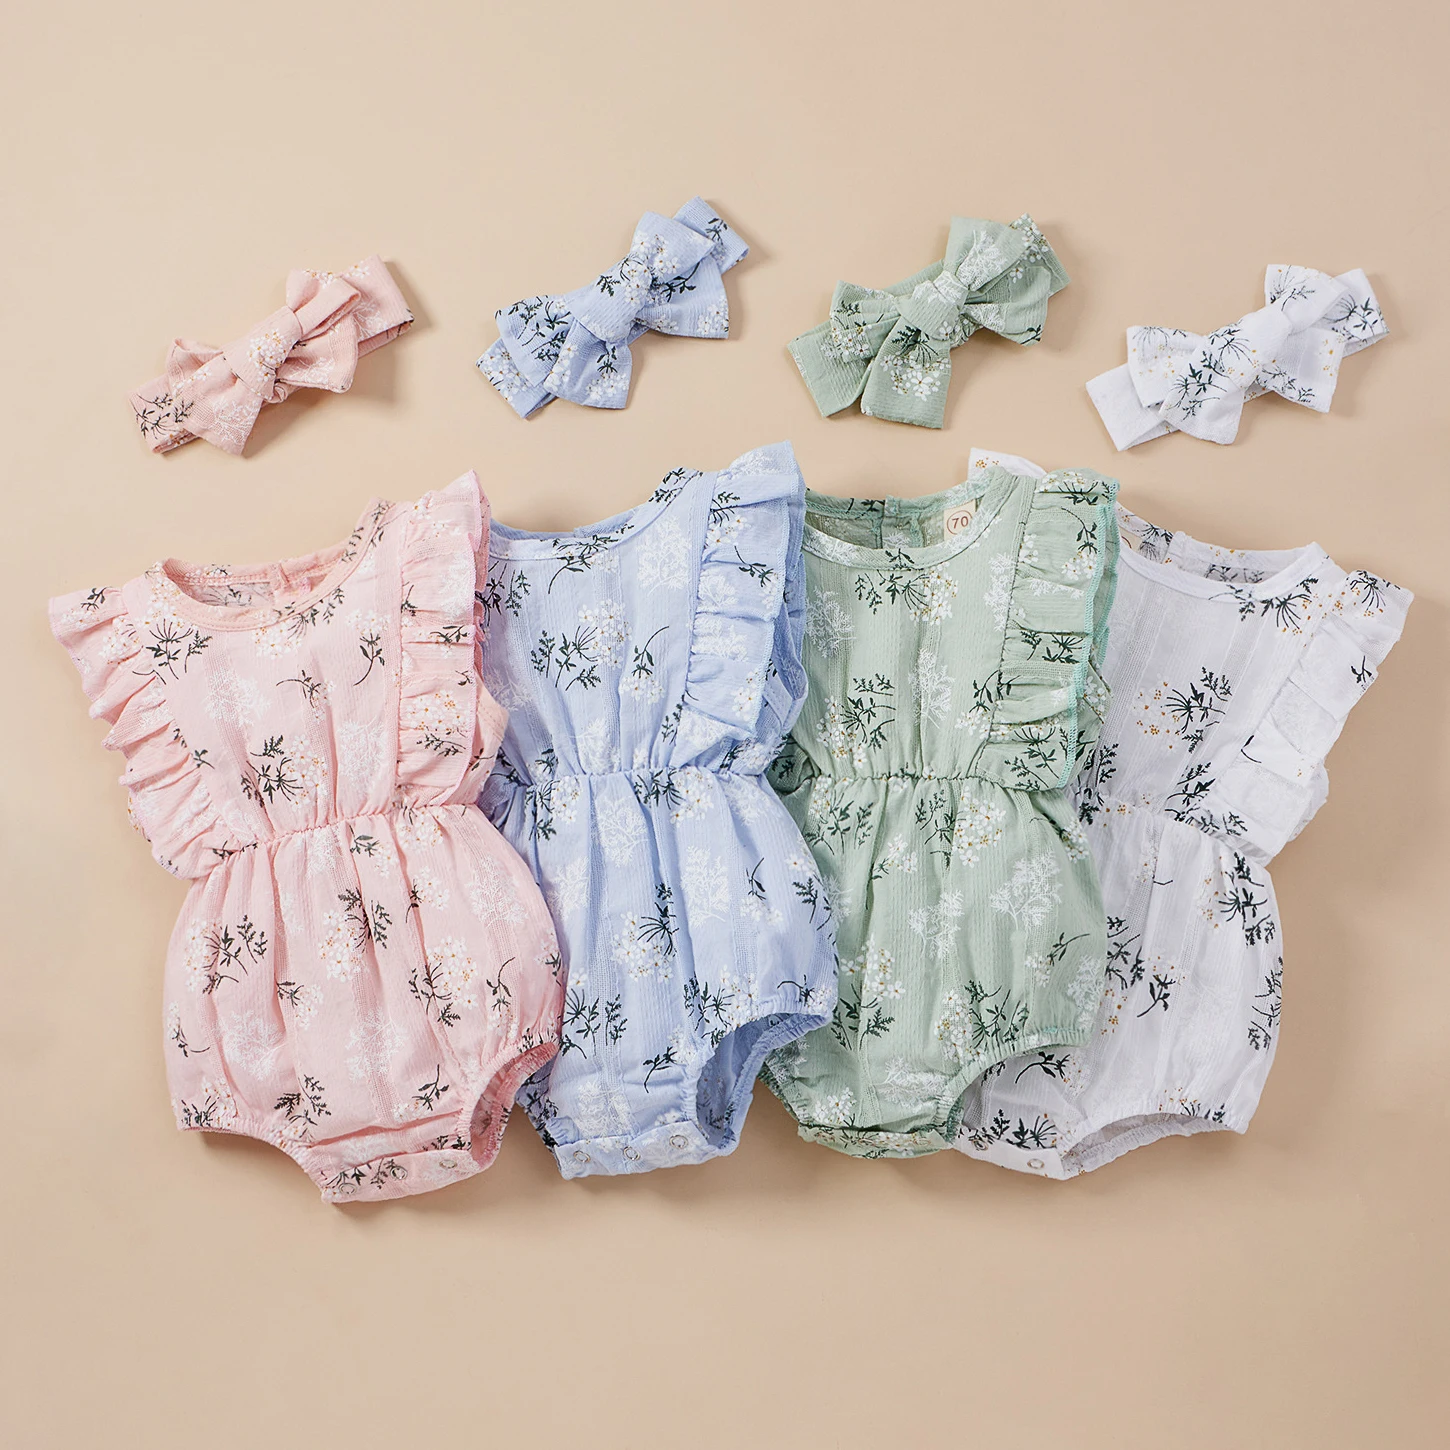 

Wholesale Summer Infant Clothes Ruffles Sleeve Backless Floral Print Cotton Headband Outfits Baby Girls Clothes Romper Sets, Photo showed and customized color